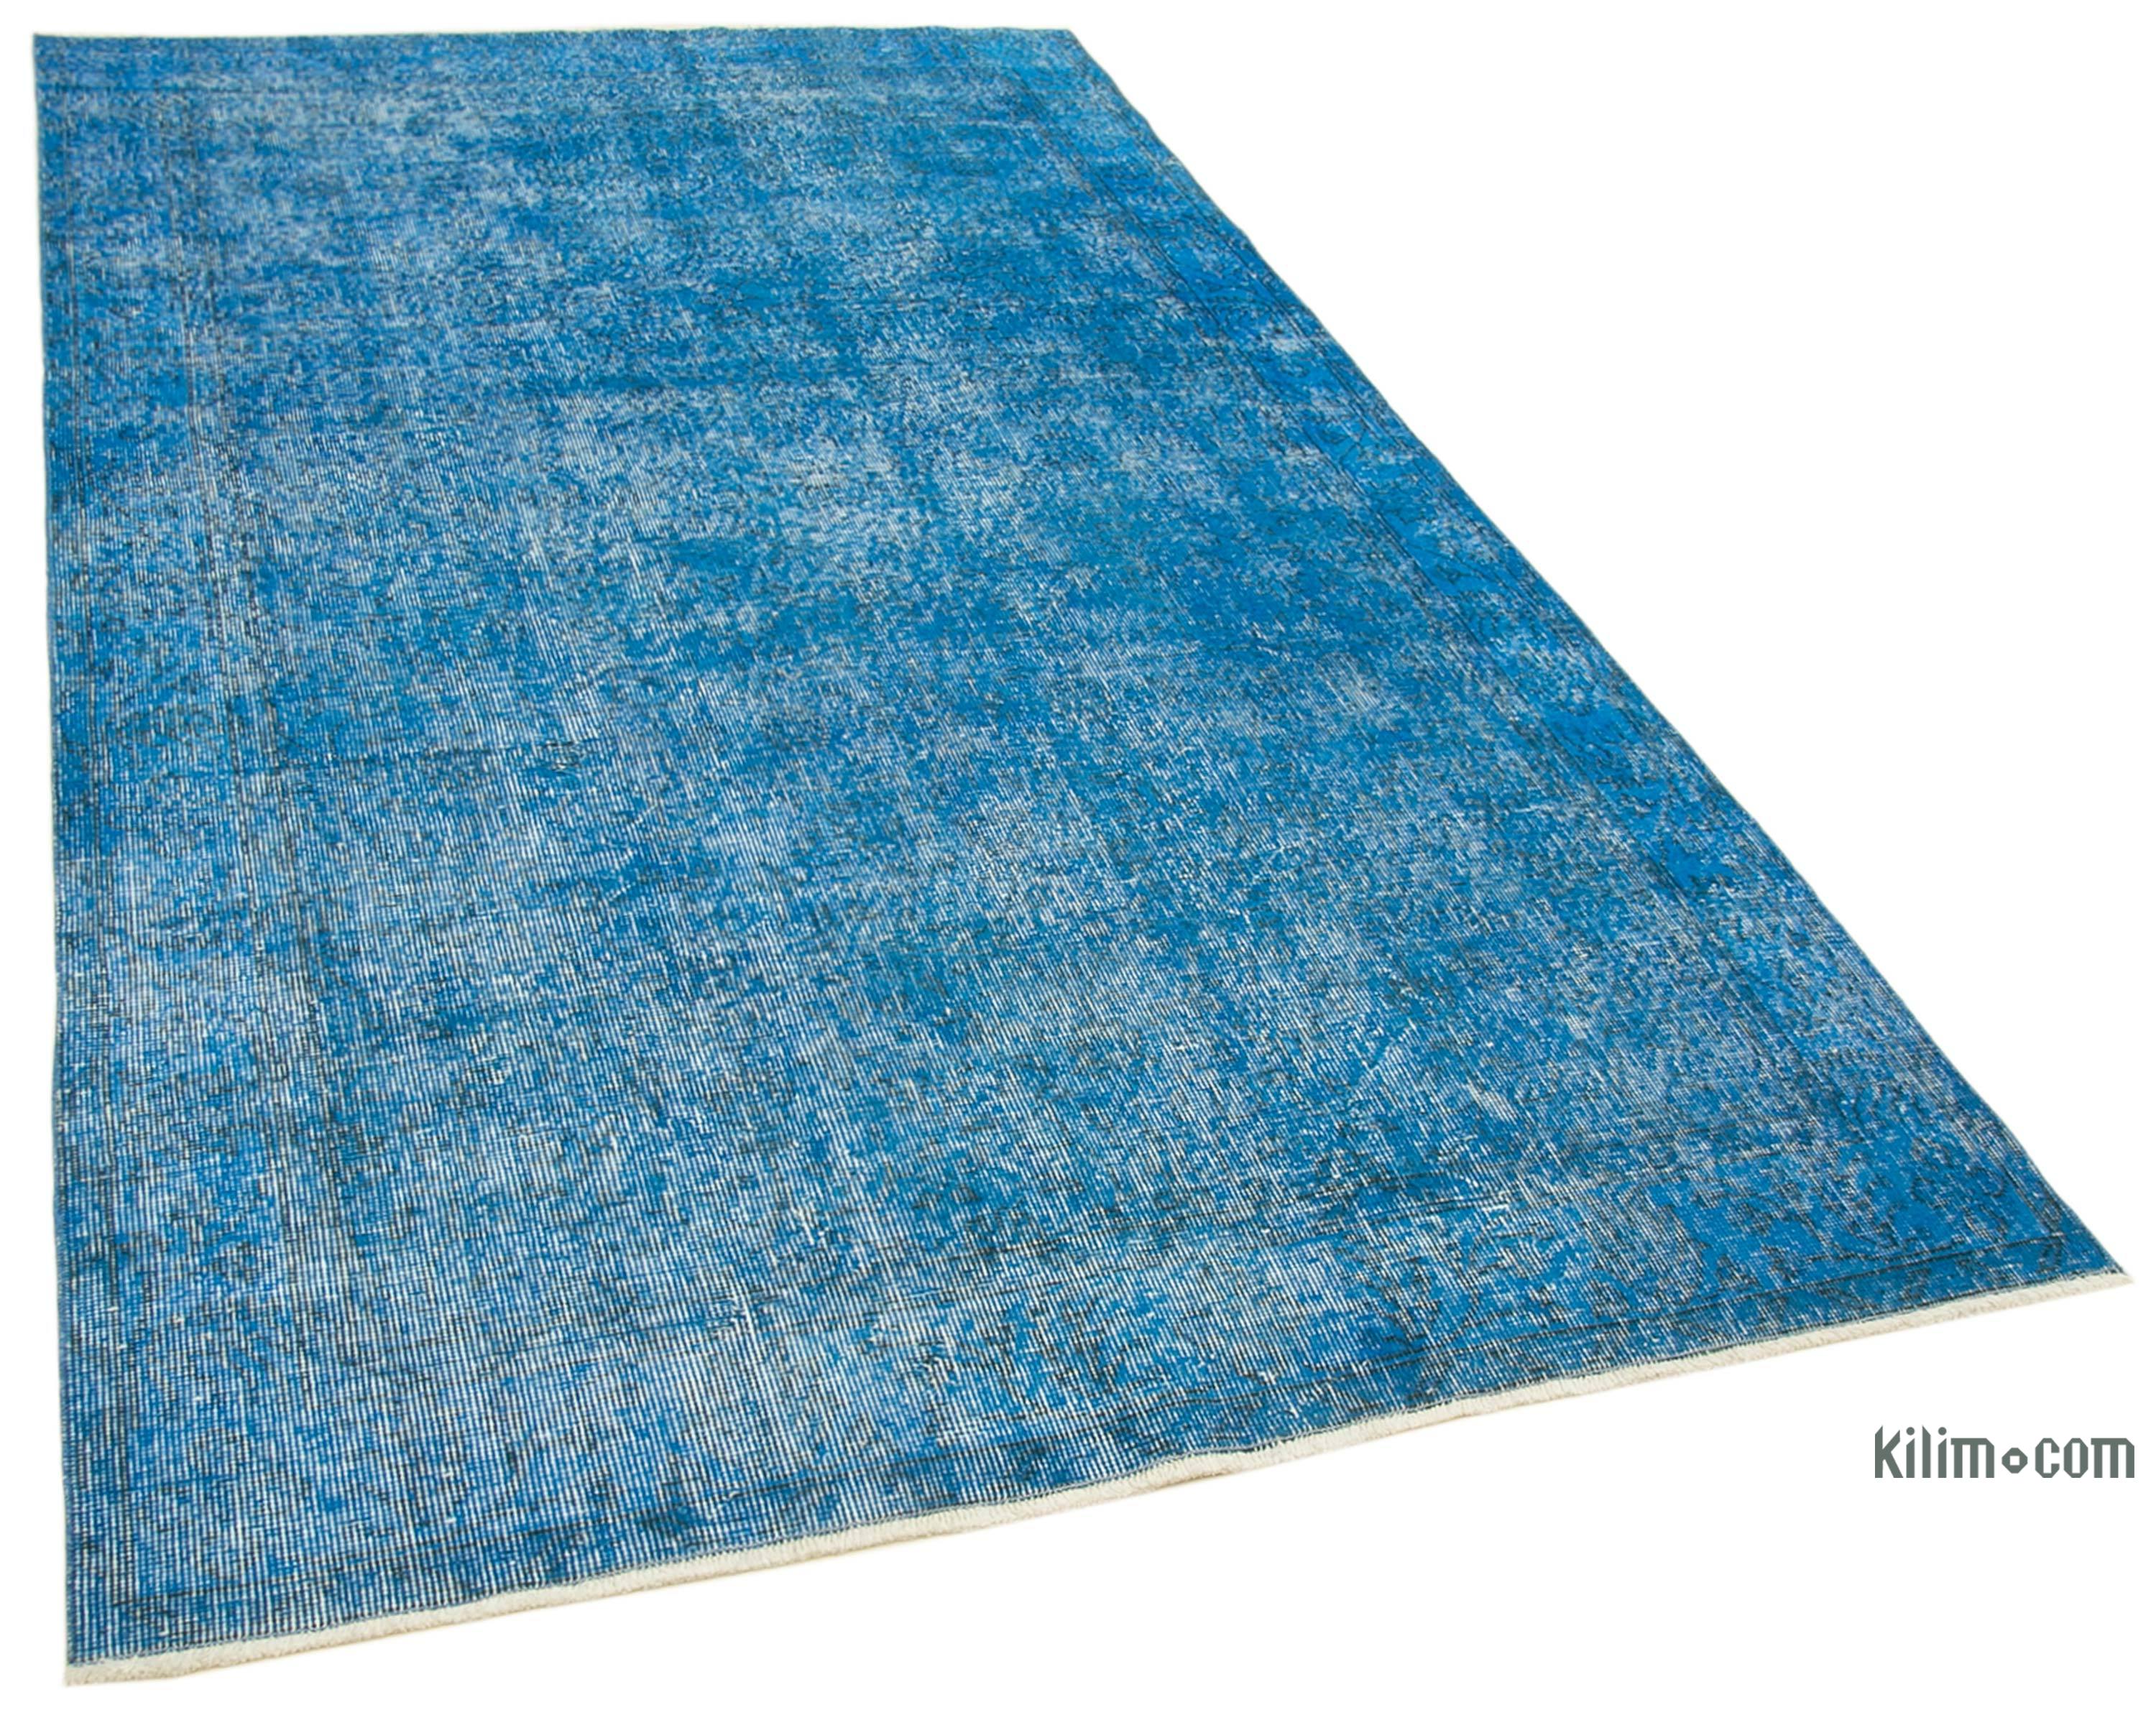 Blue Over-dyed Vintage Hand-Knotted Turkish Rug - 5' 1